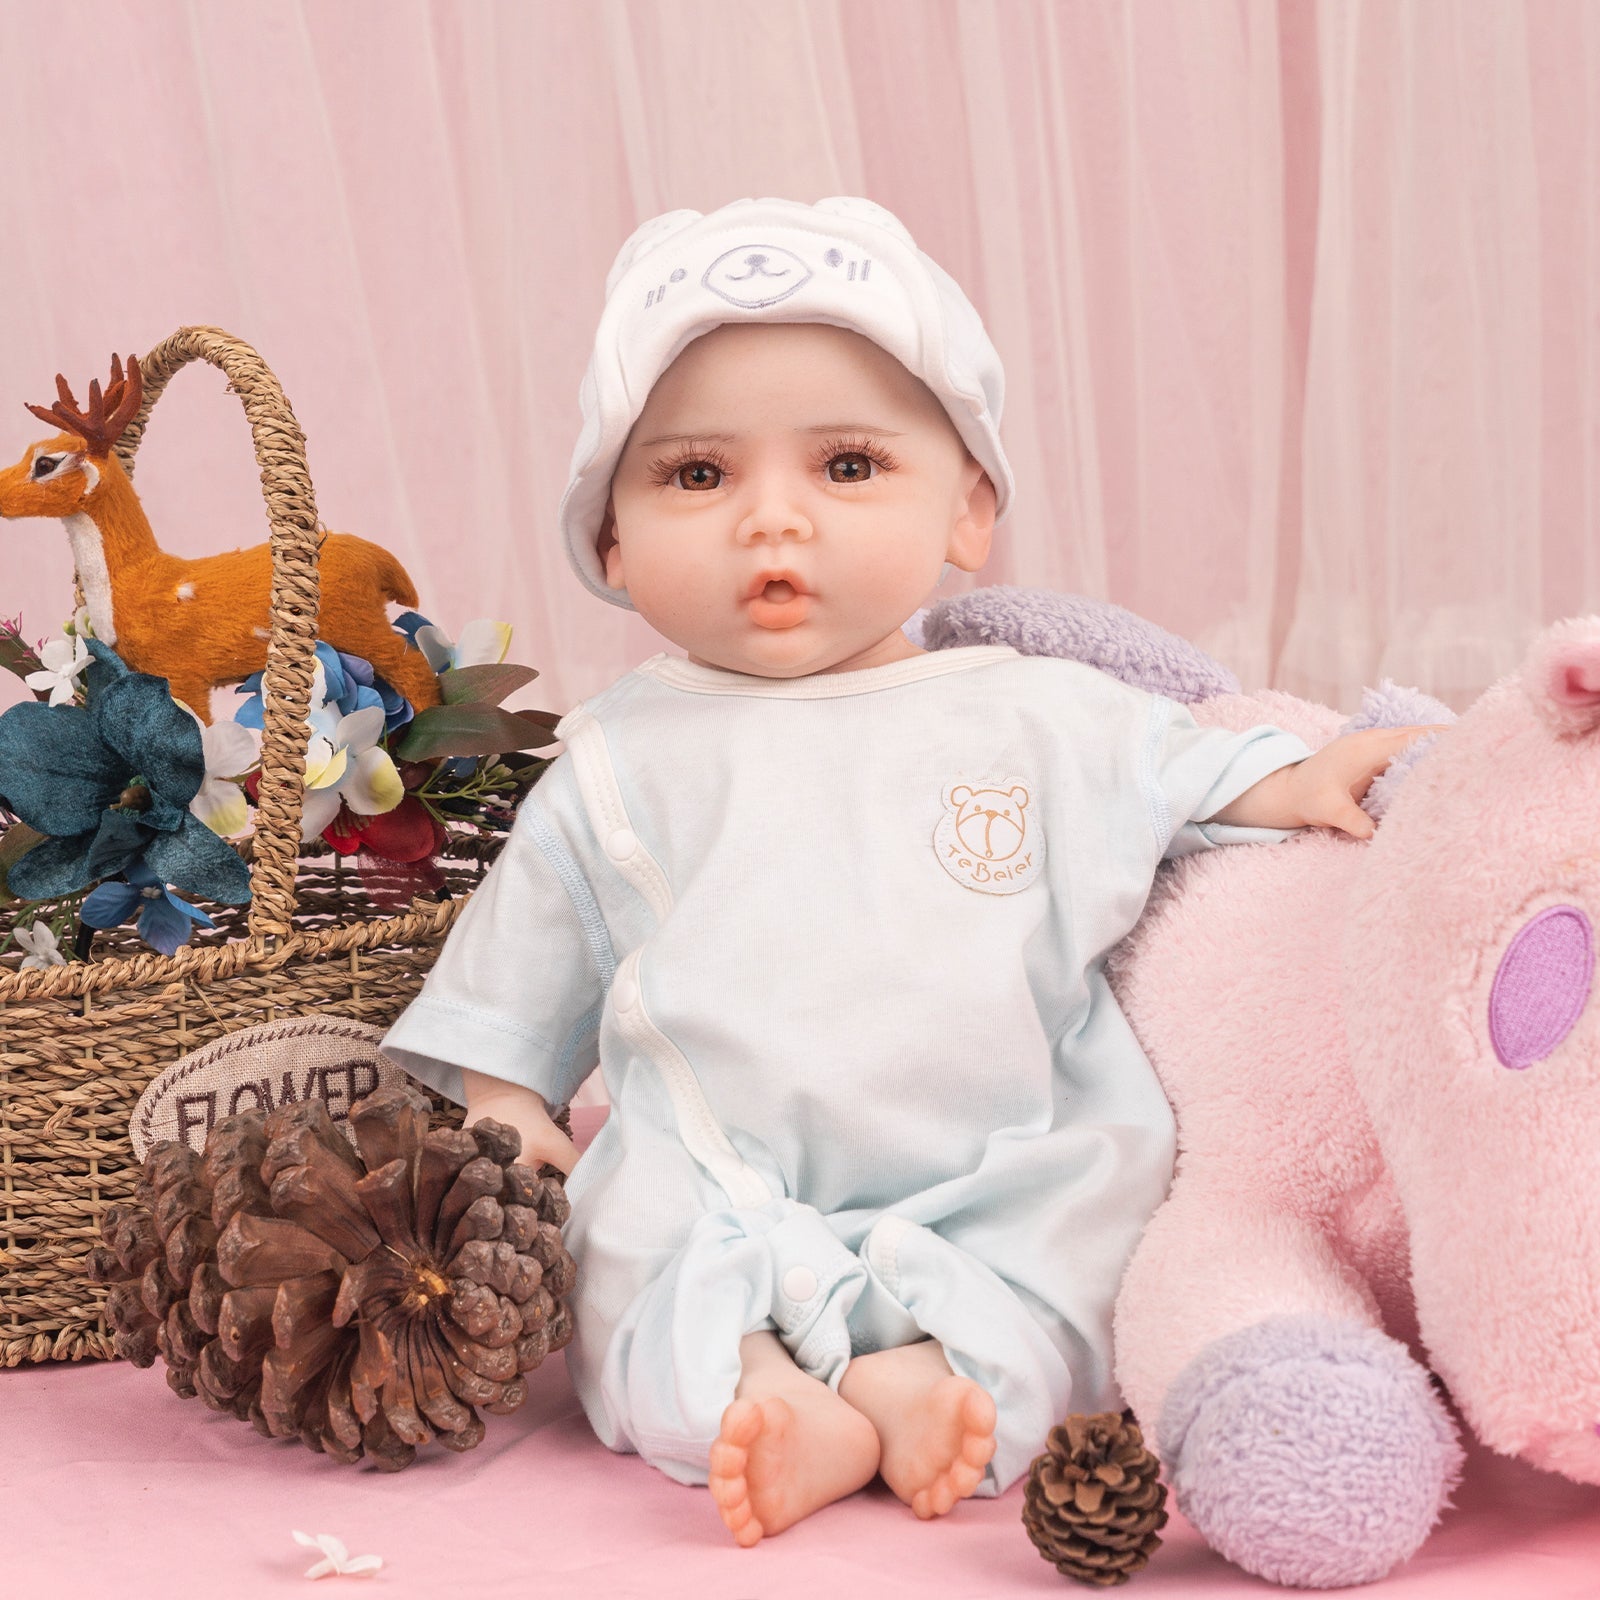 What Is a Reborn Doll?